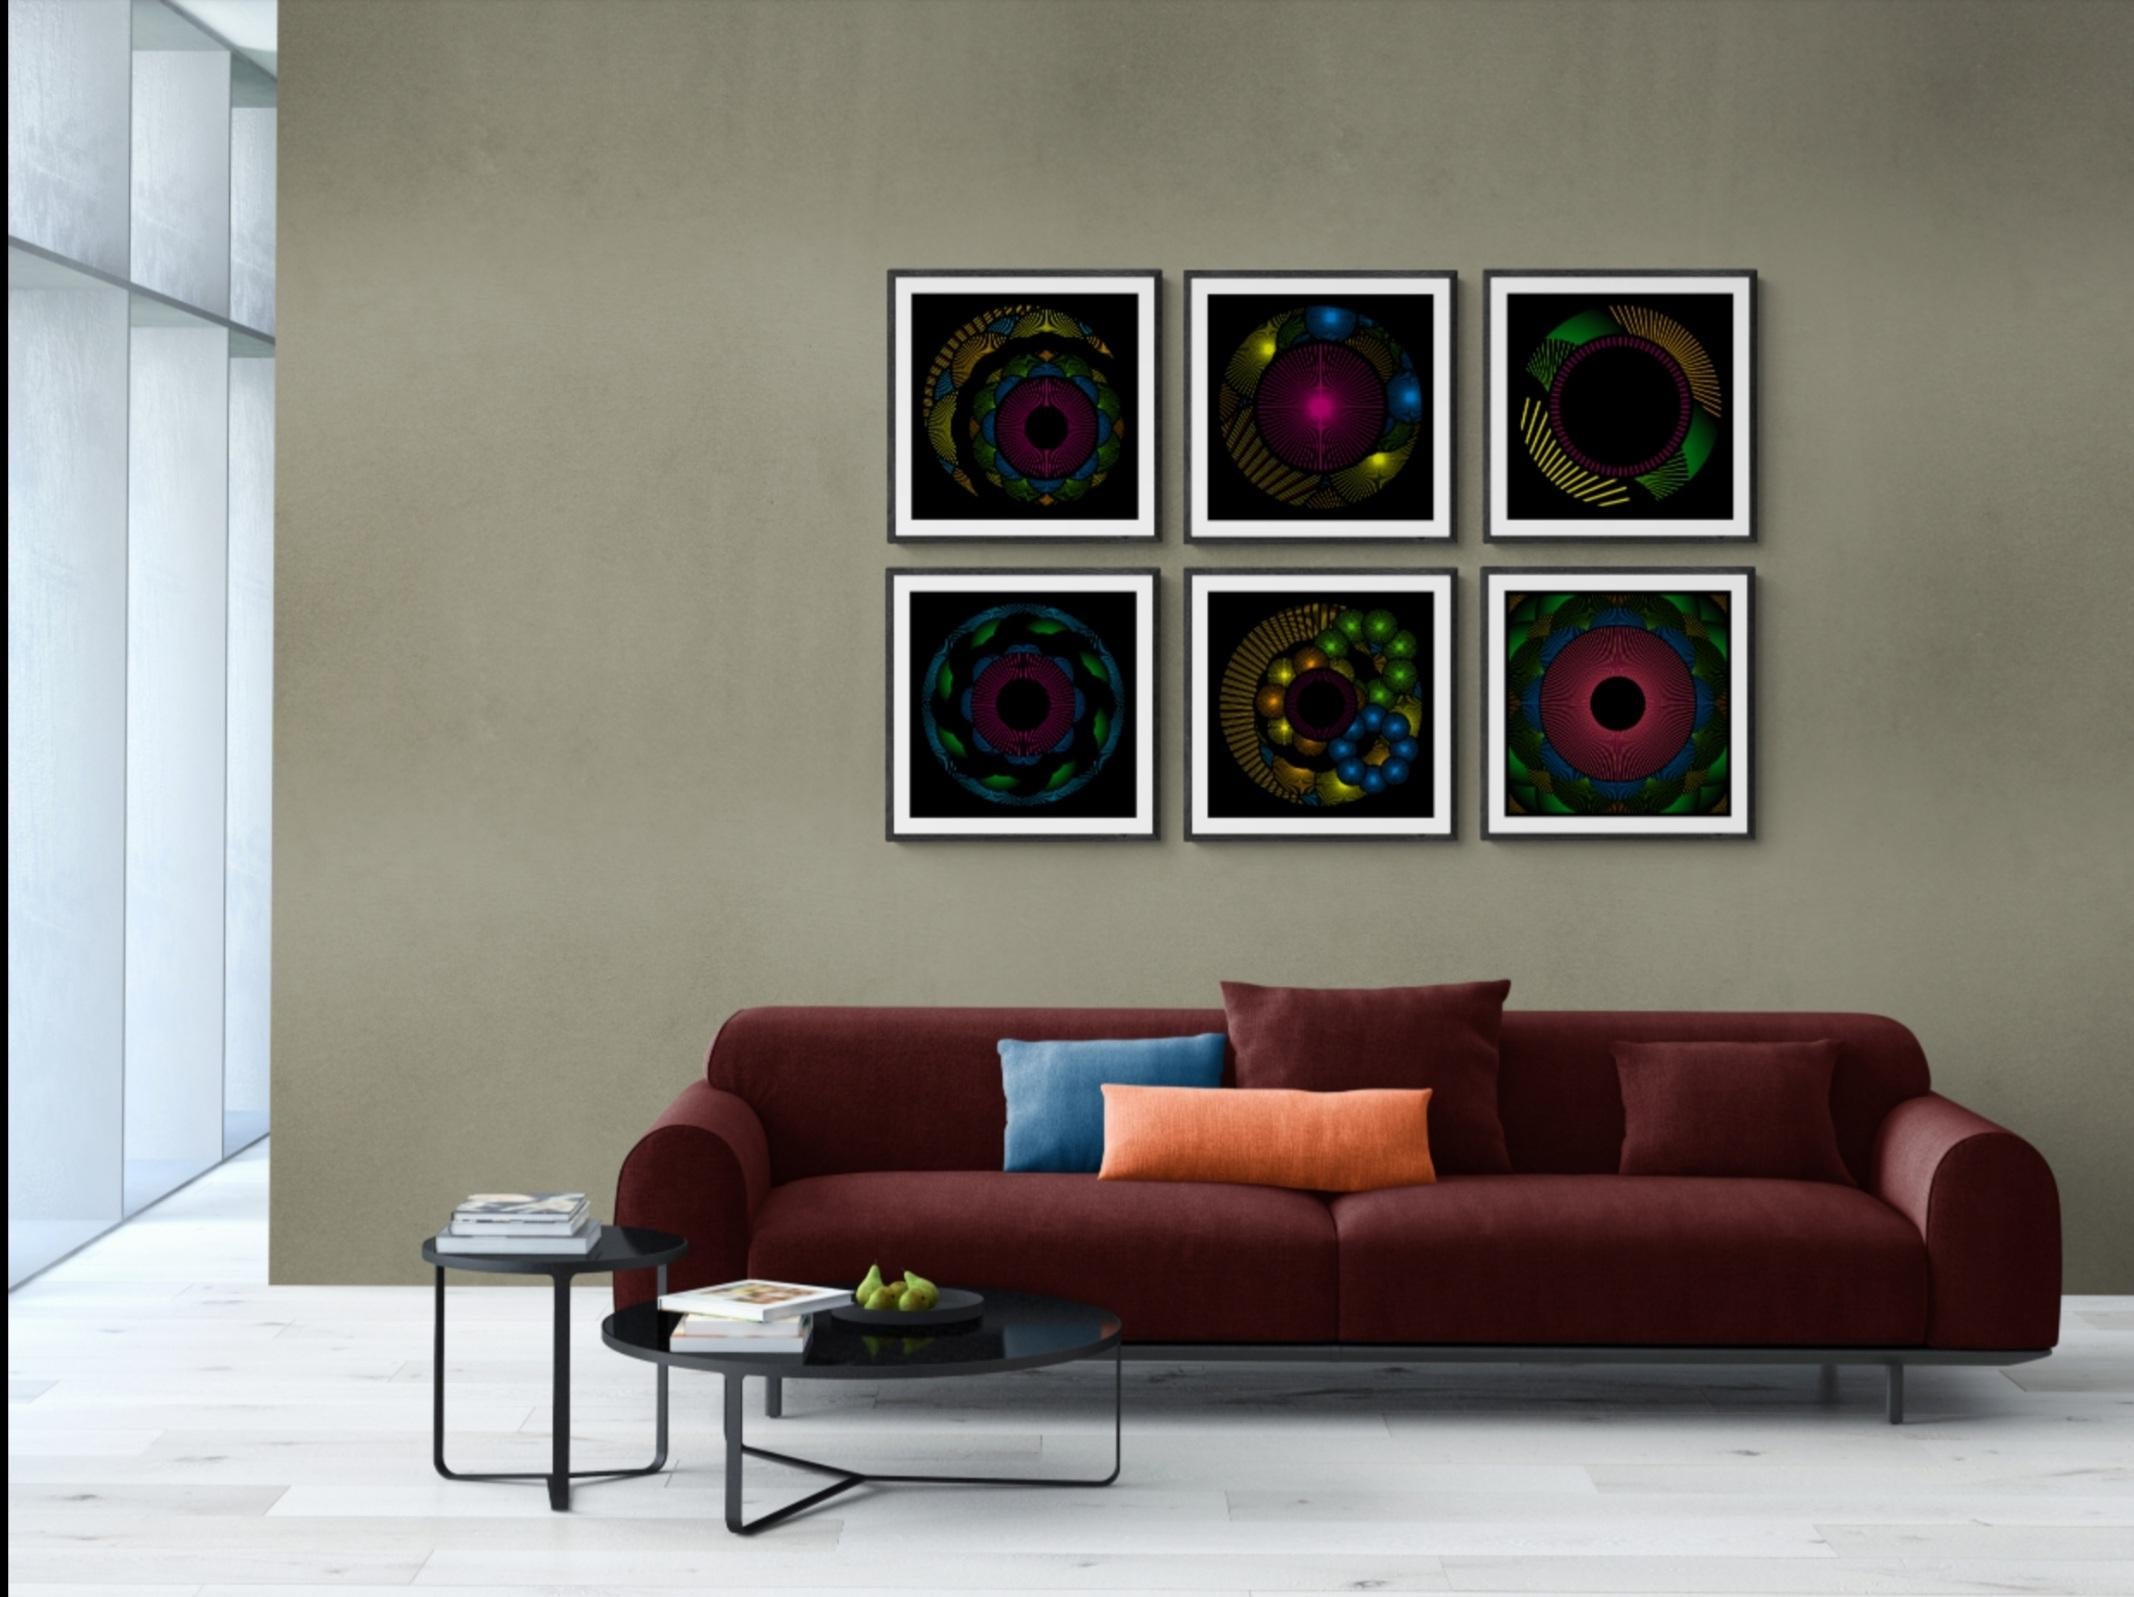 Nebulosa 11 - Abstract Geometric Print by Julio Campos